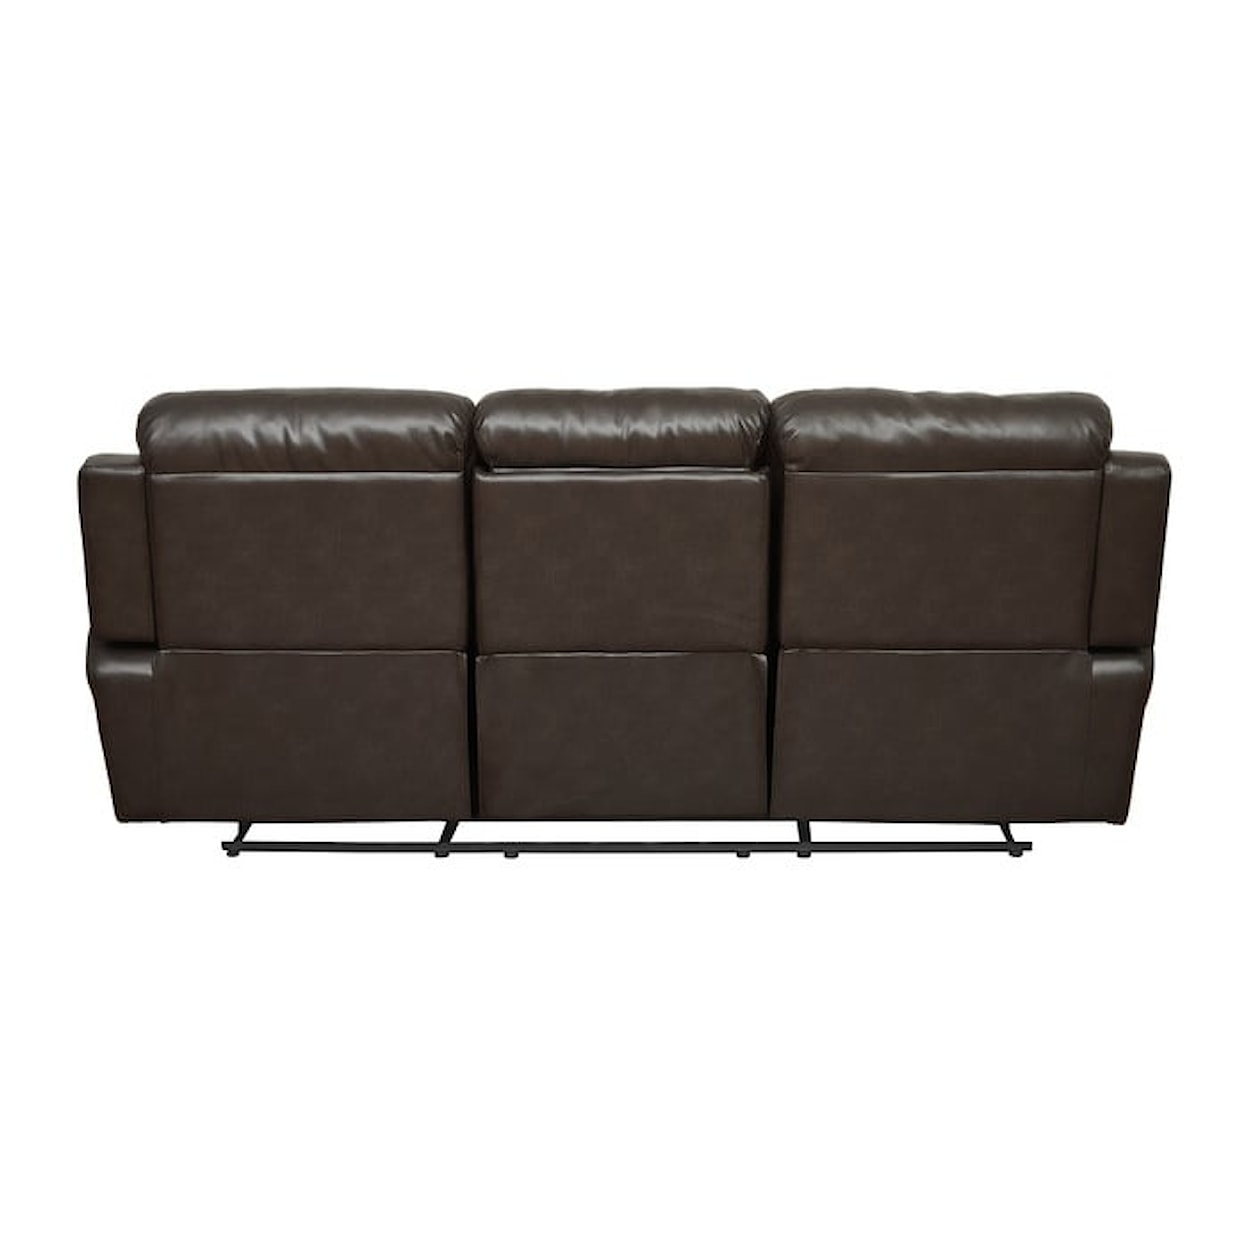 Homelegance Marille Reclining Sofa with Cup Holders